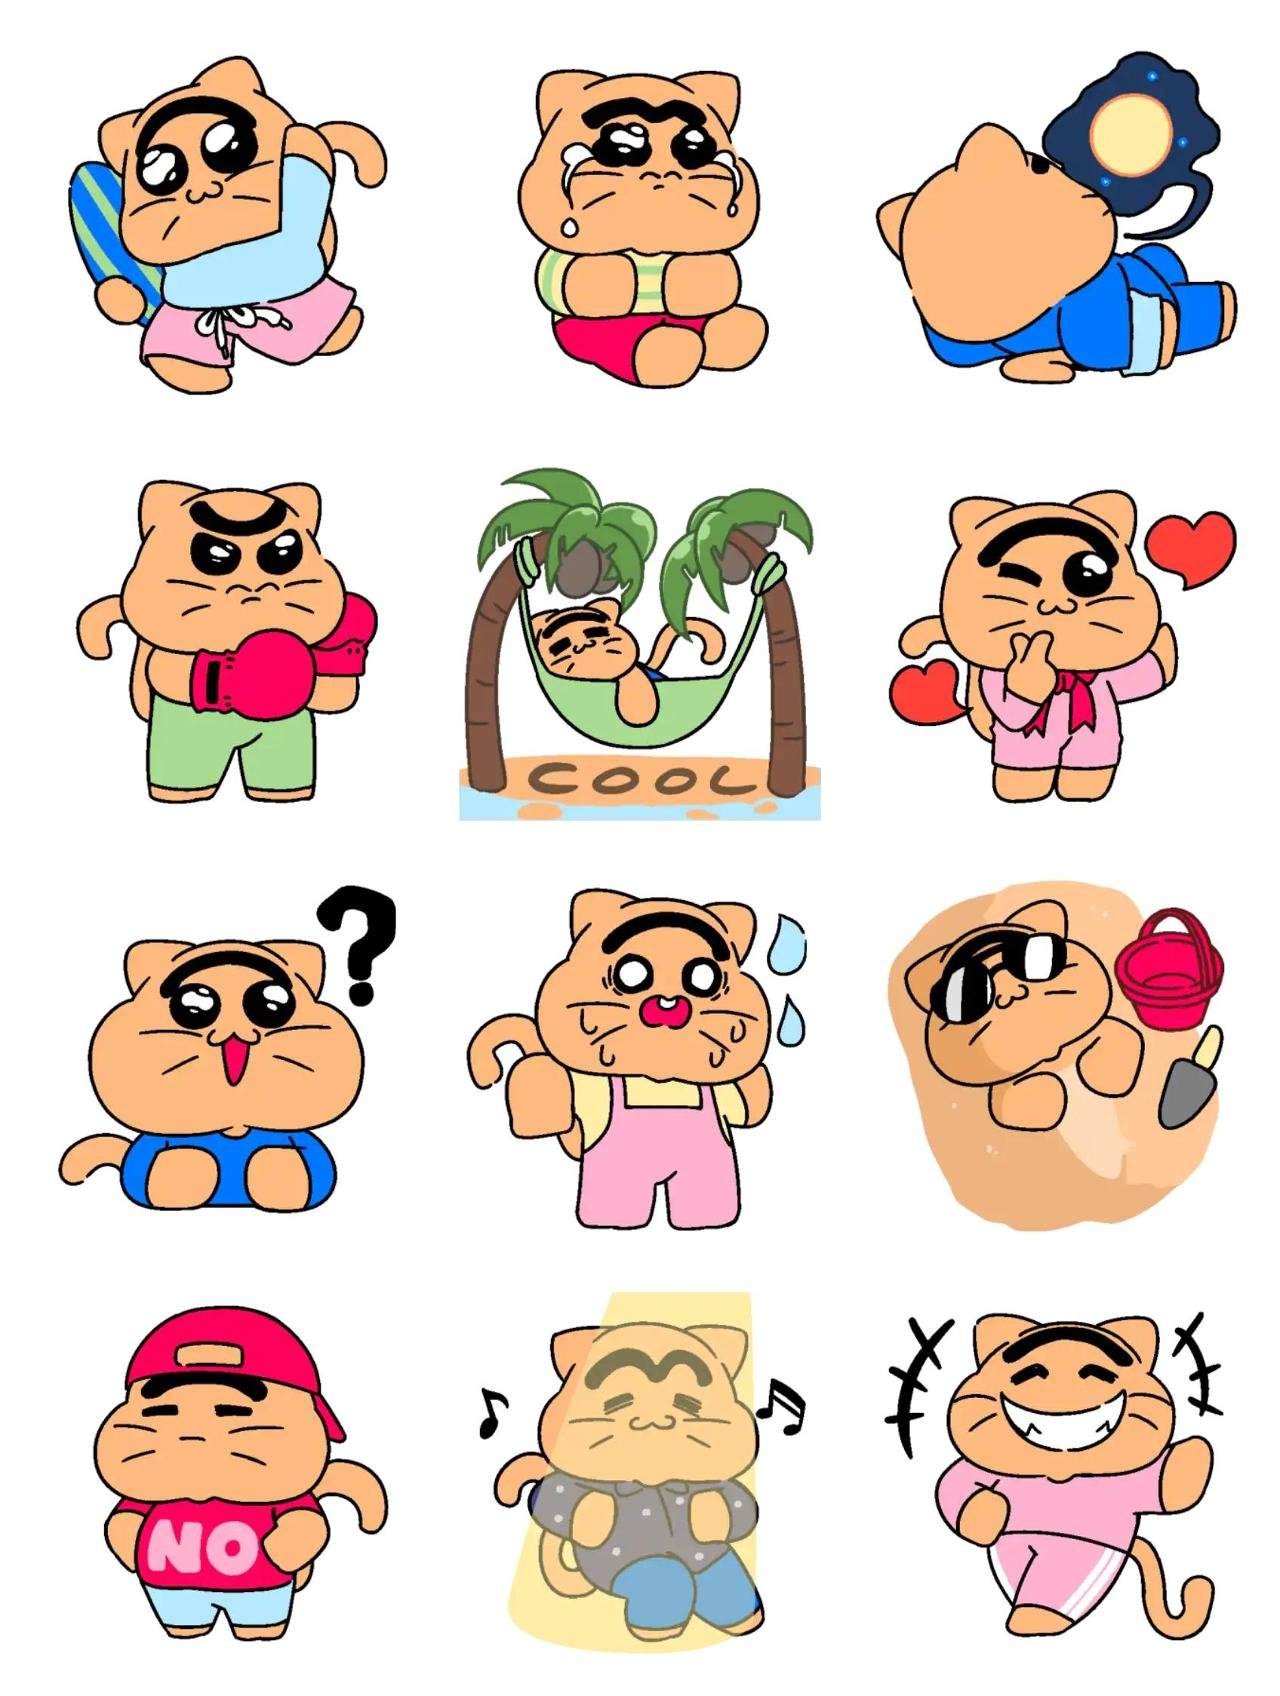 Enjoy summer with Blondy Animation/Cartoon,Animals sticker pack for Whatsapp, Telegram, Signal, and others chatting and message apps